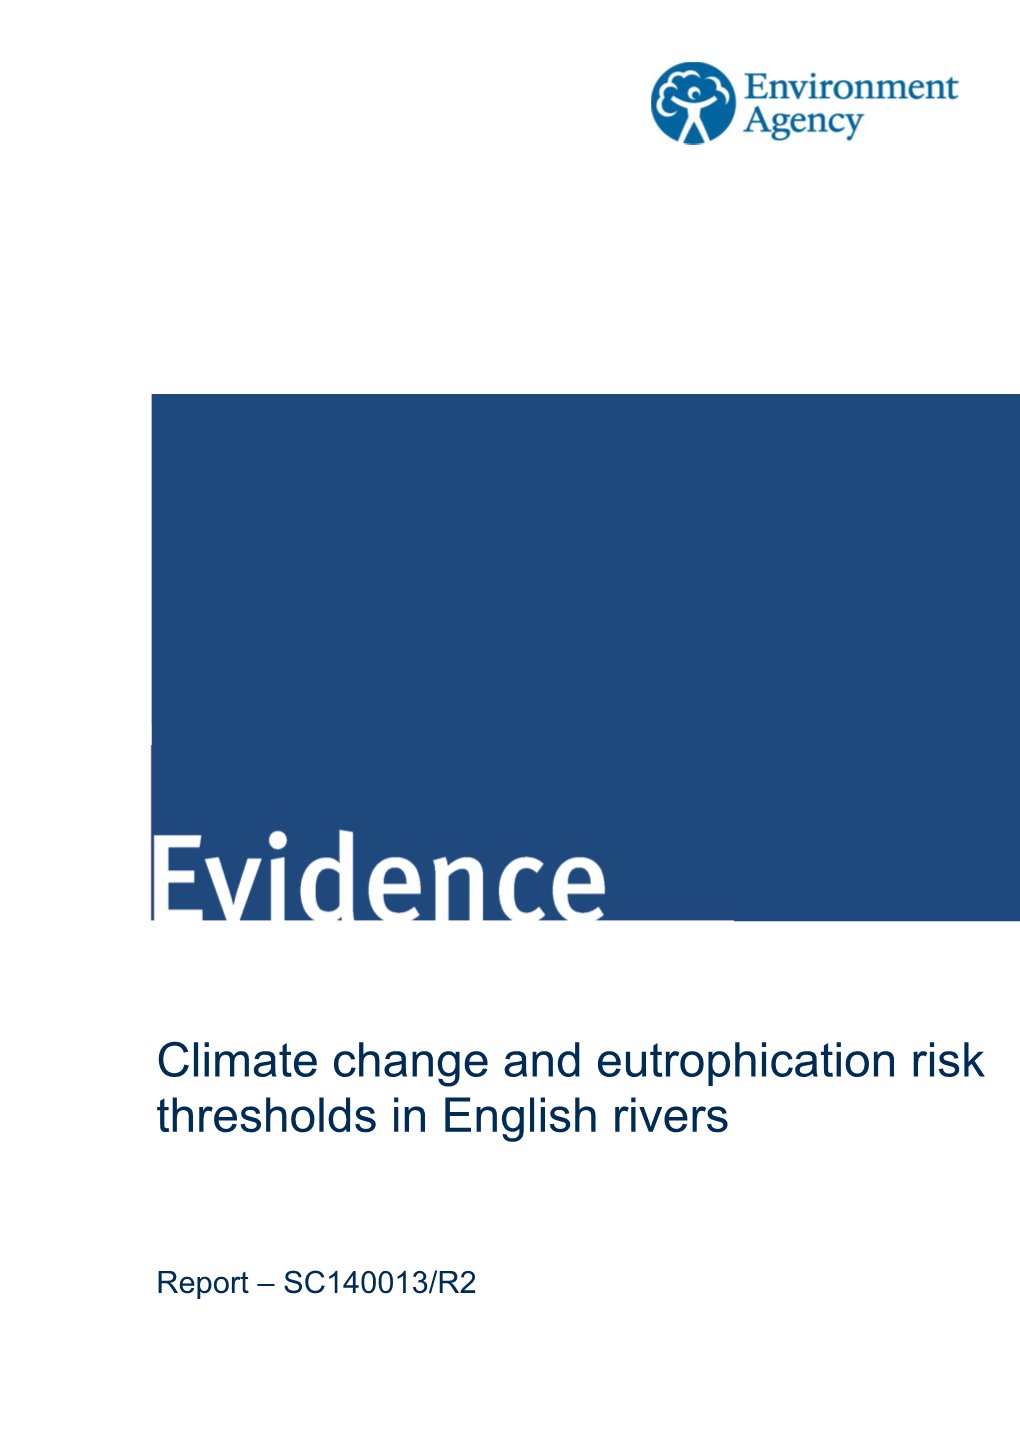 Climate Change and Eutrophication Risk in English Rivers: Report